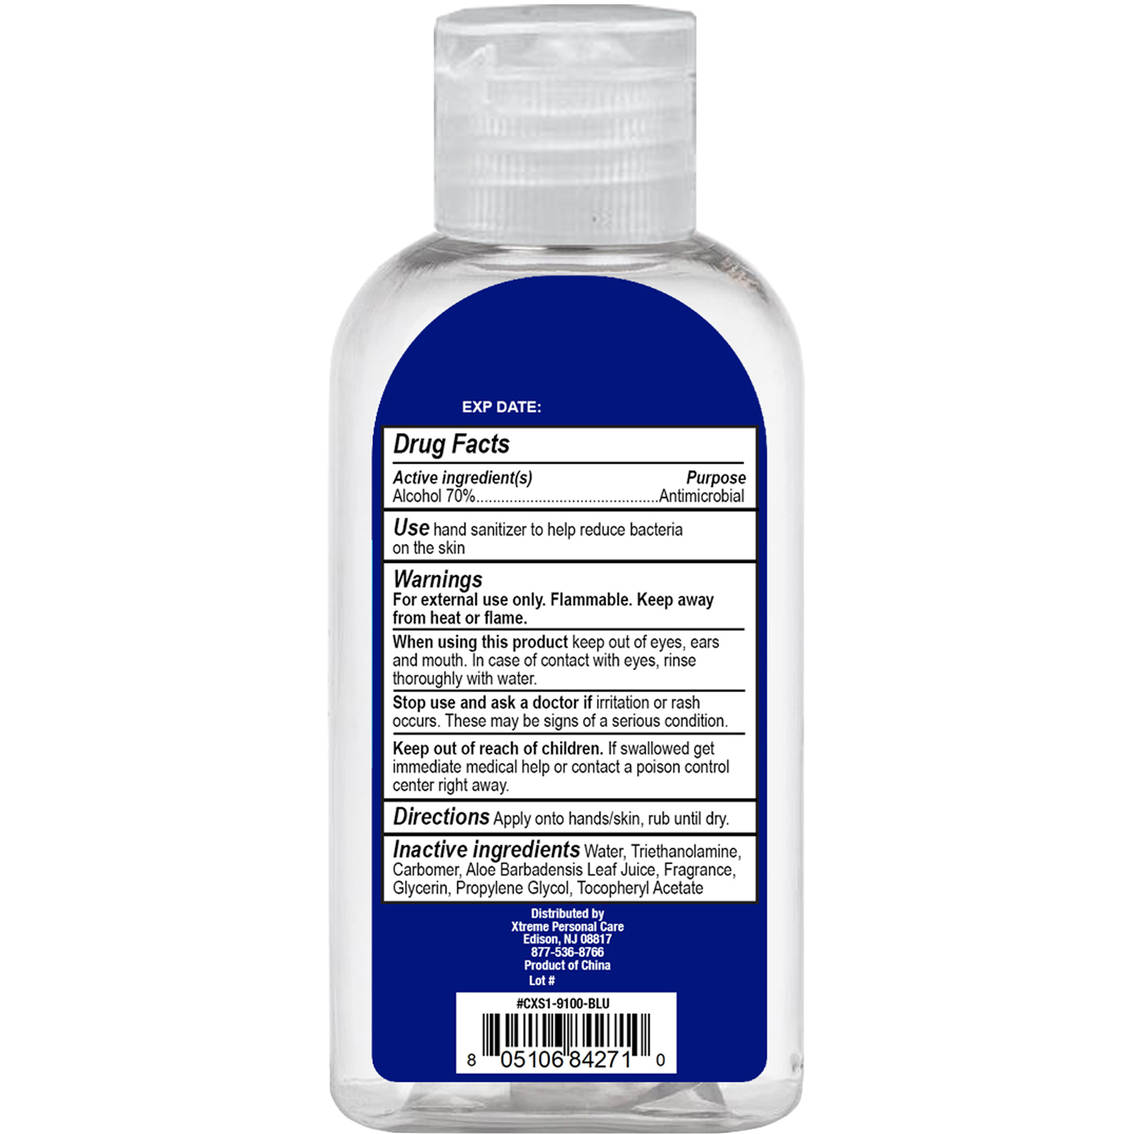 Xtreme Personal Care Hand Sanitizer Gel 2 oz. - Image 2 of 2